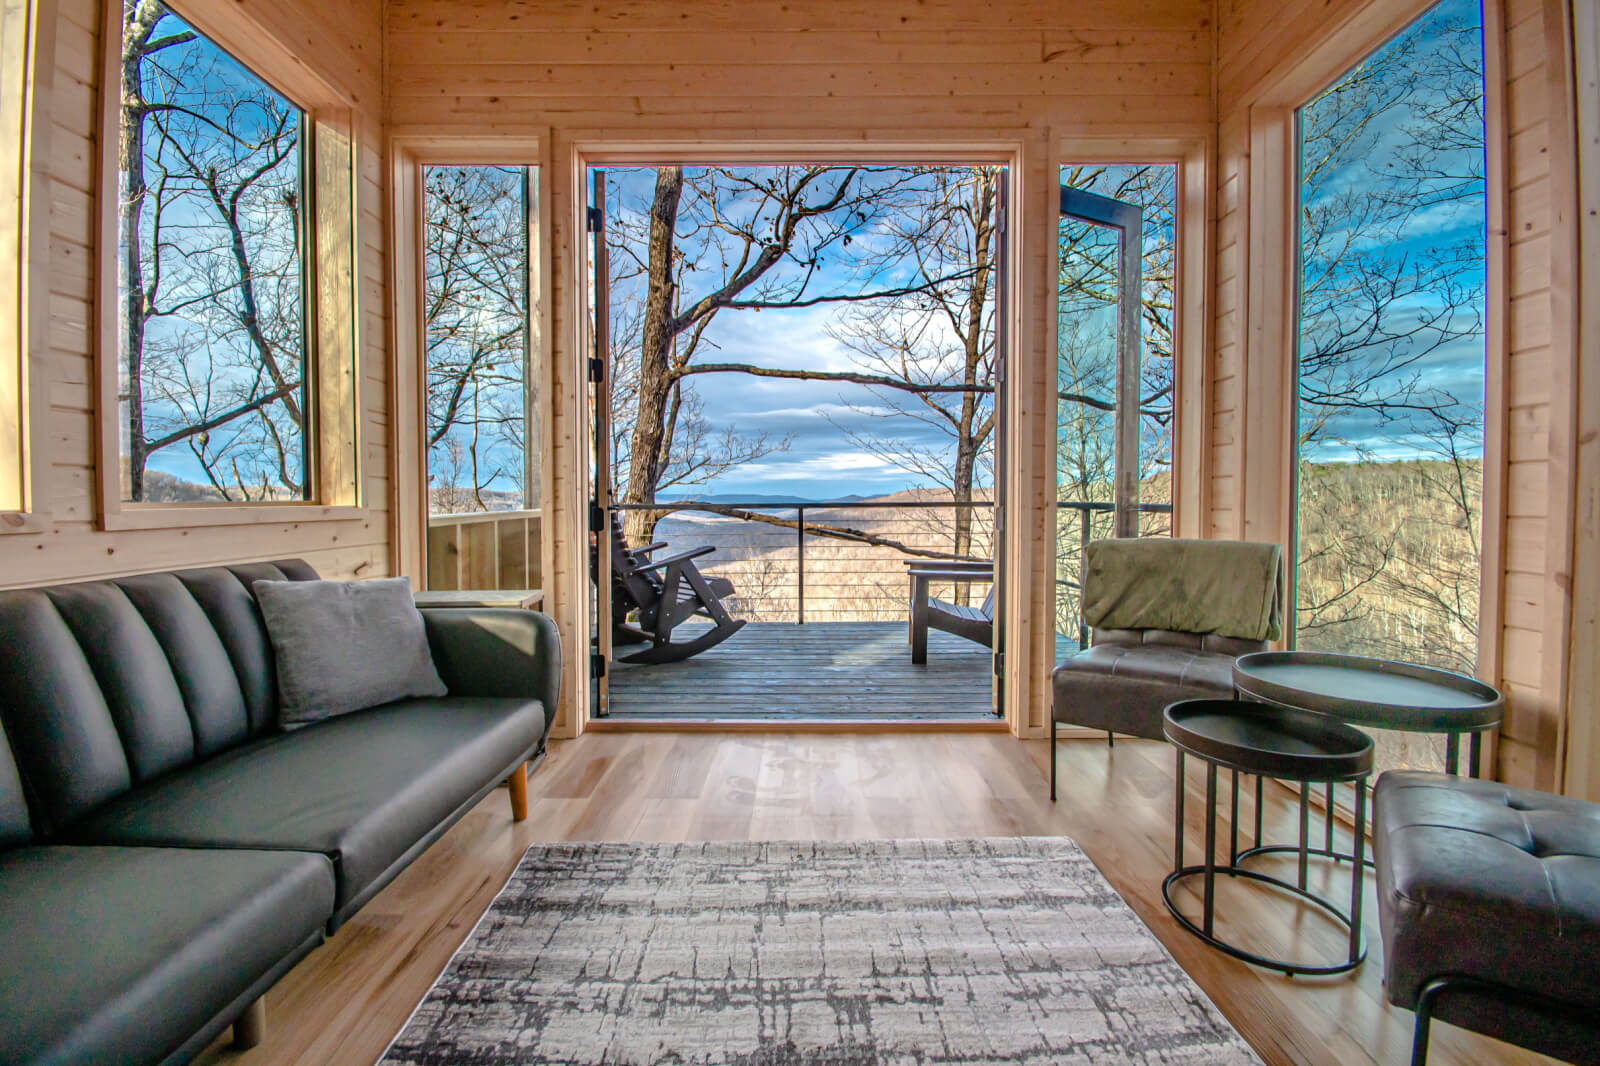 4 Reasons to Book the Tree Lofts for Your Next Getaway